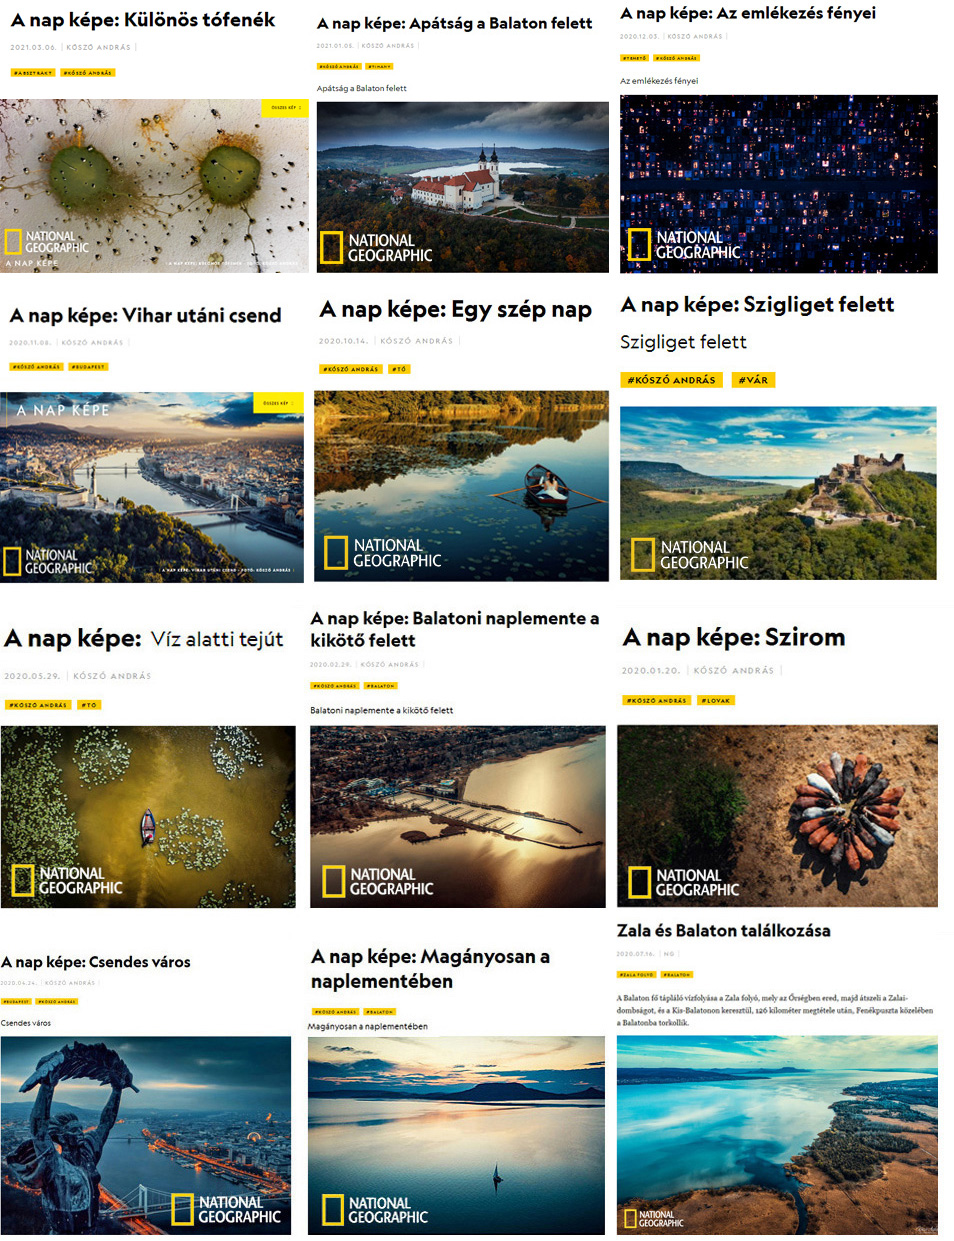 National Geographic nap kpe